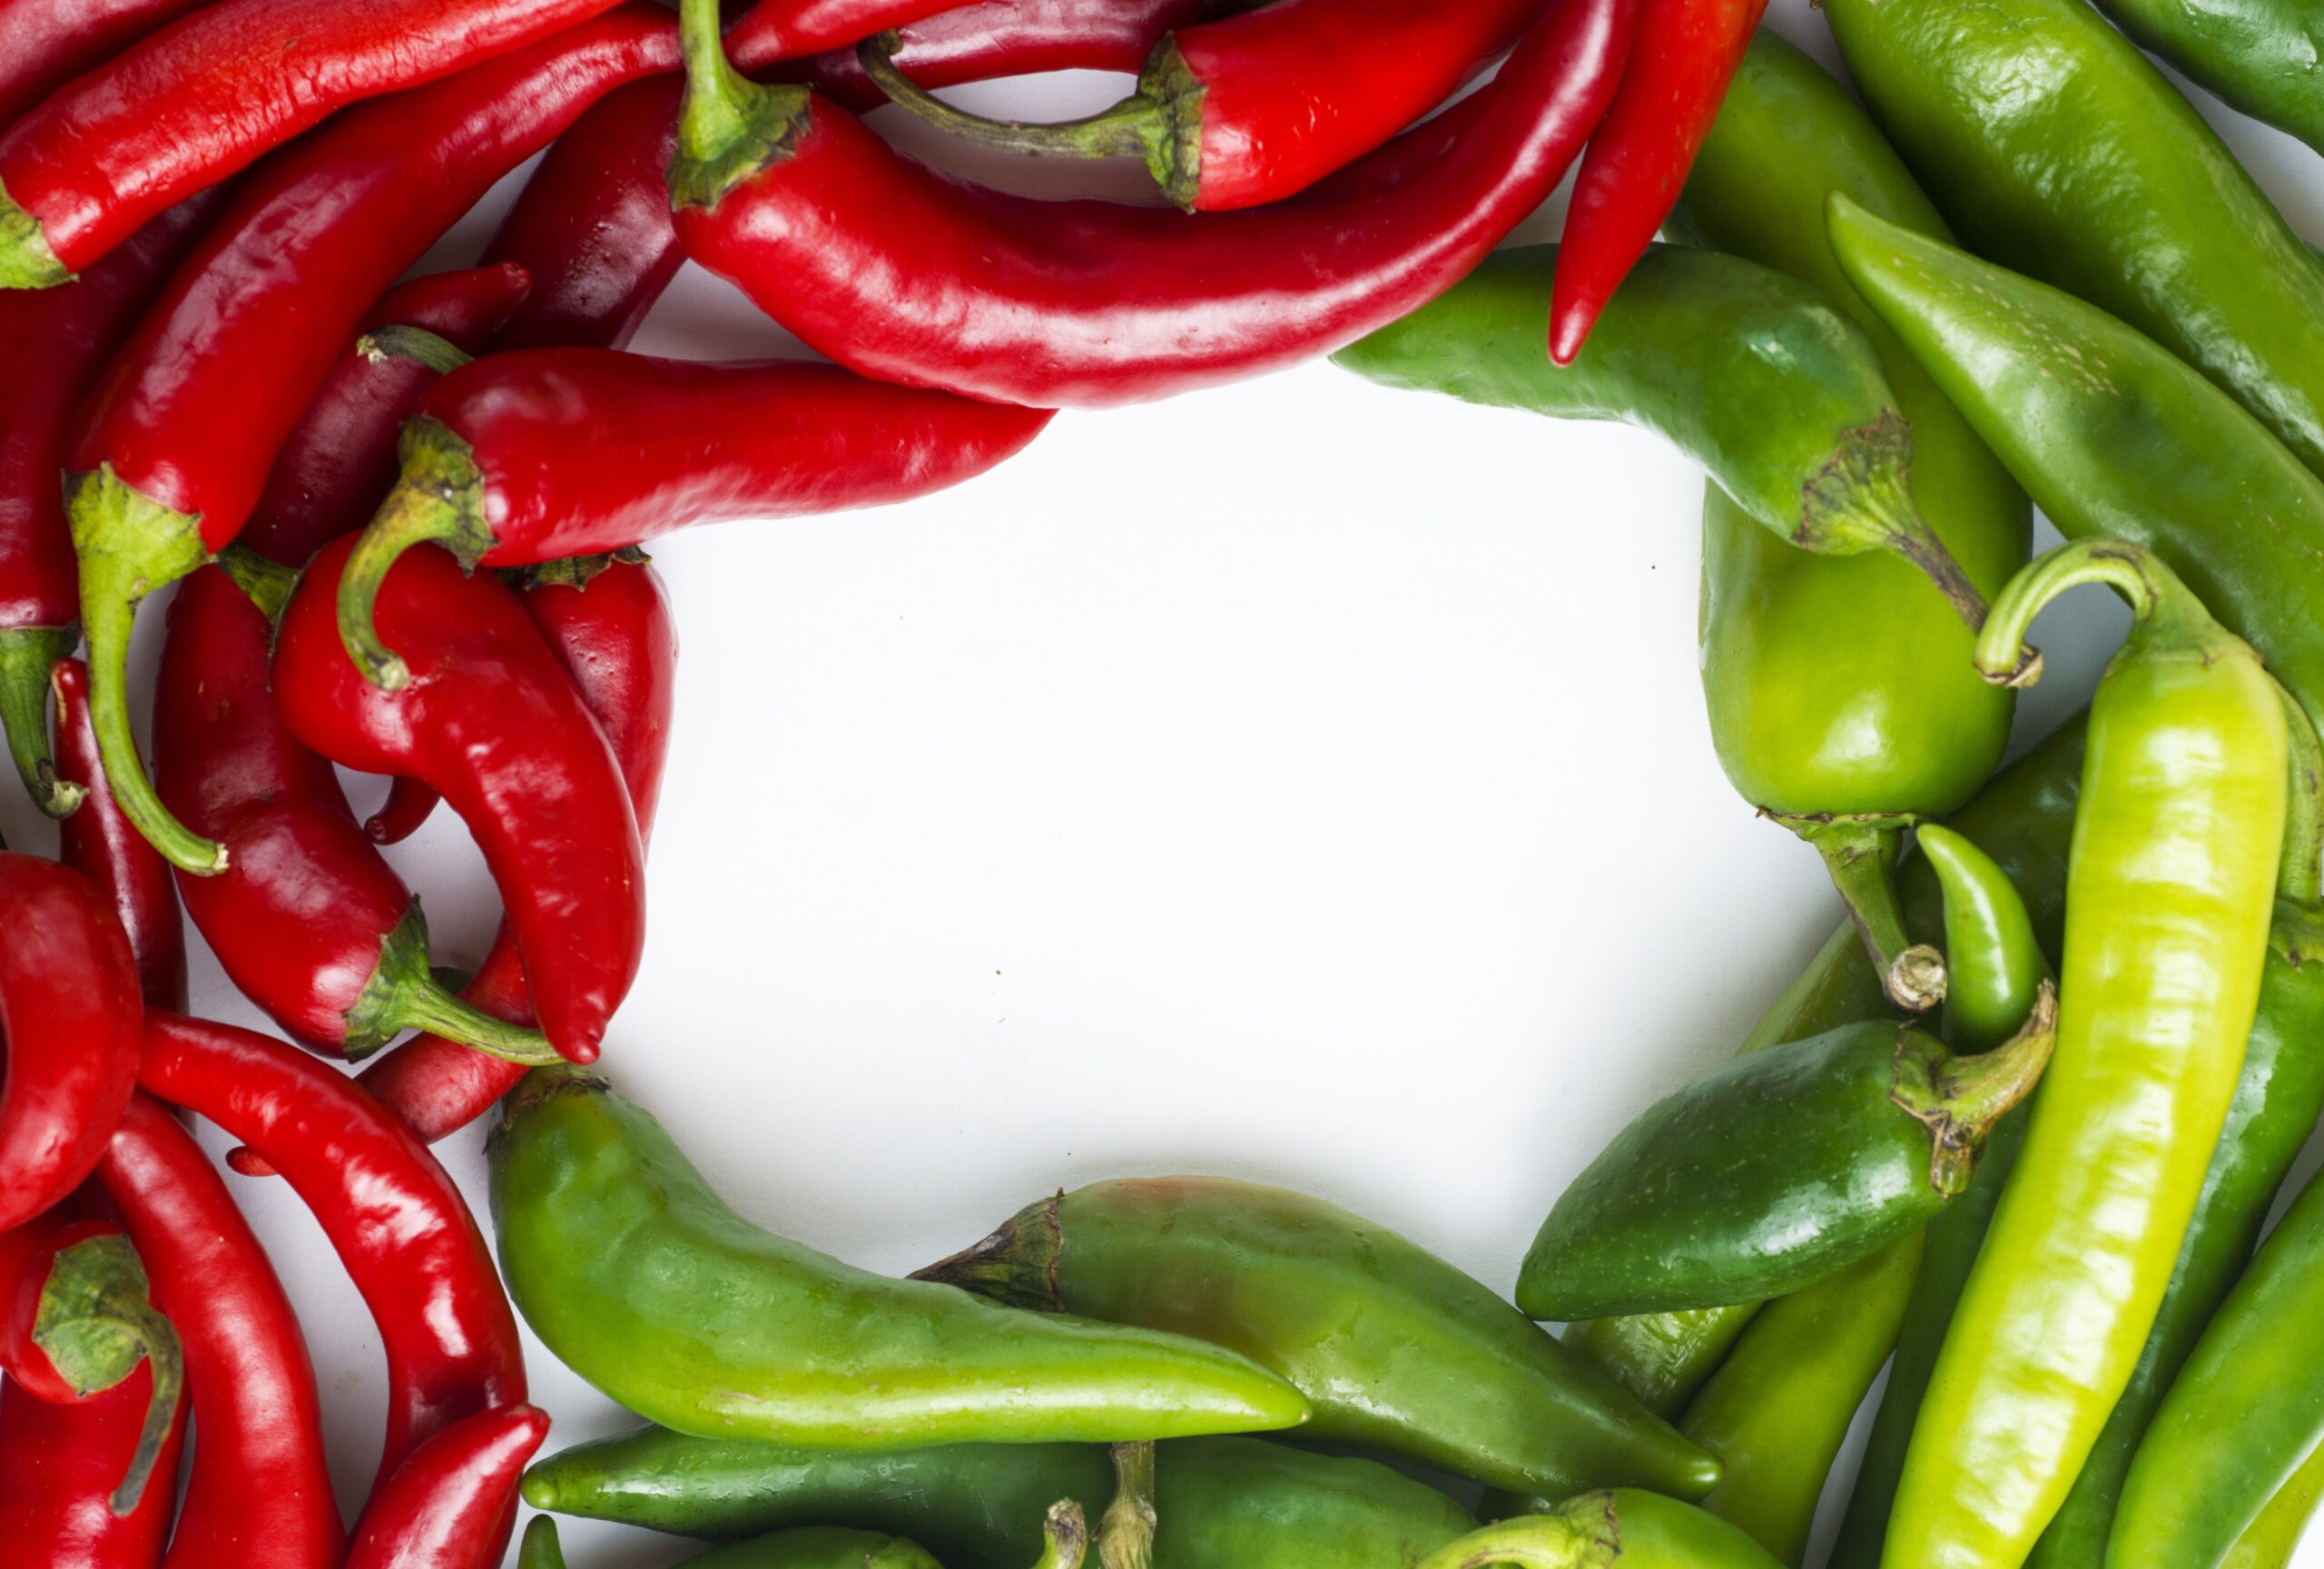 Chili Peppers Do More Than Spice Up Food